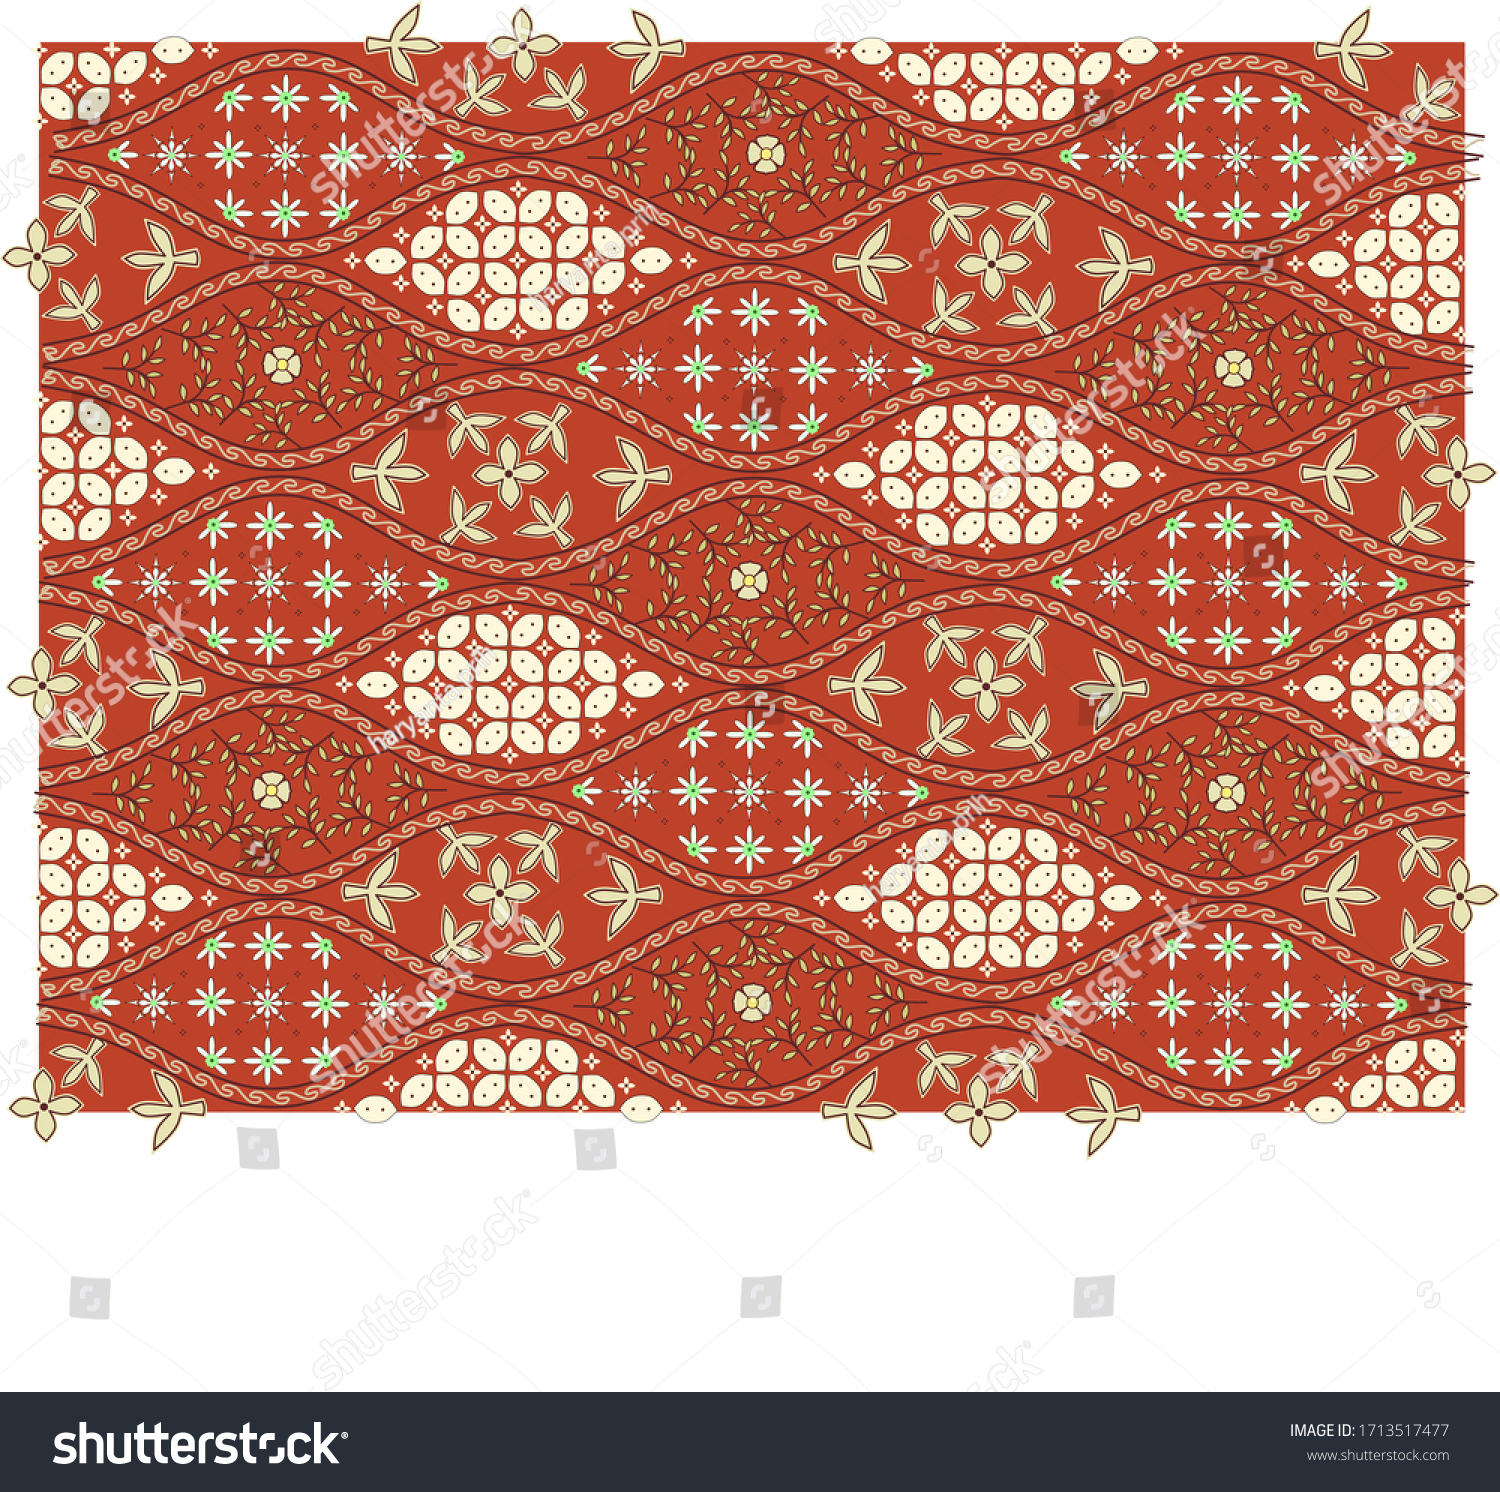 SVG of Plant shape patterns, batik cloth motifs from Solo, Indonesia. svg